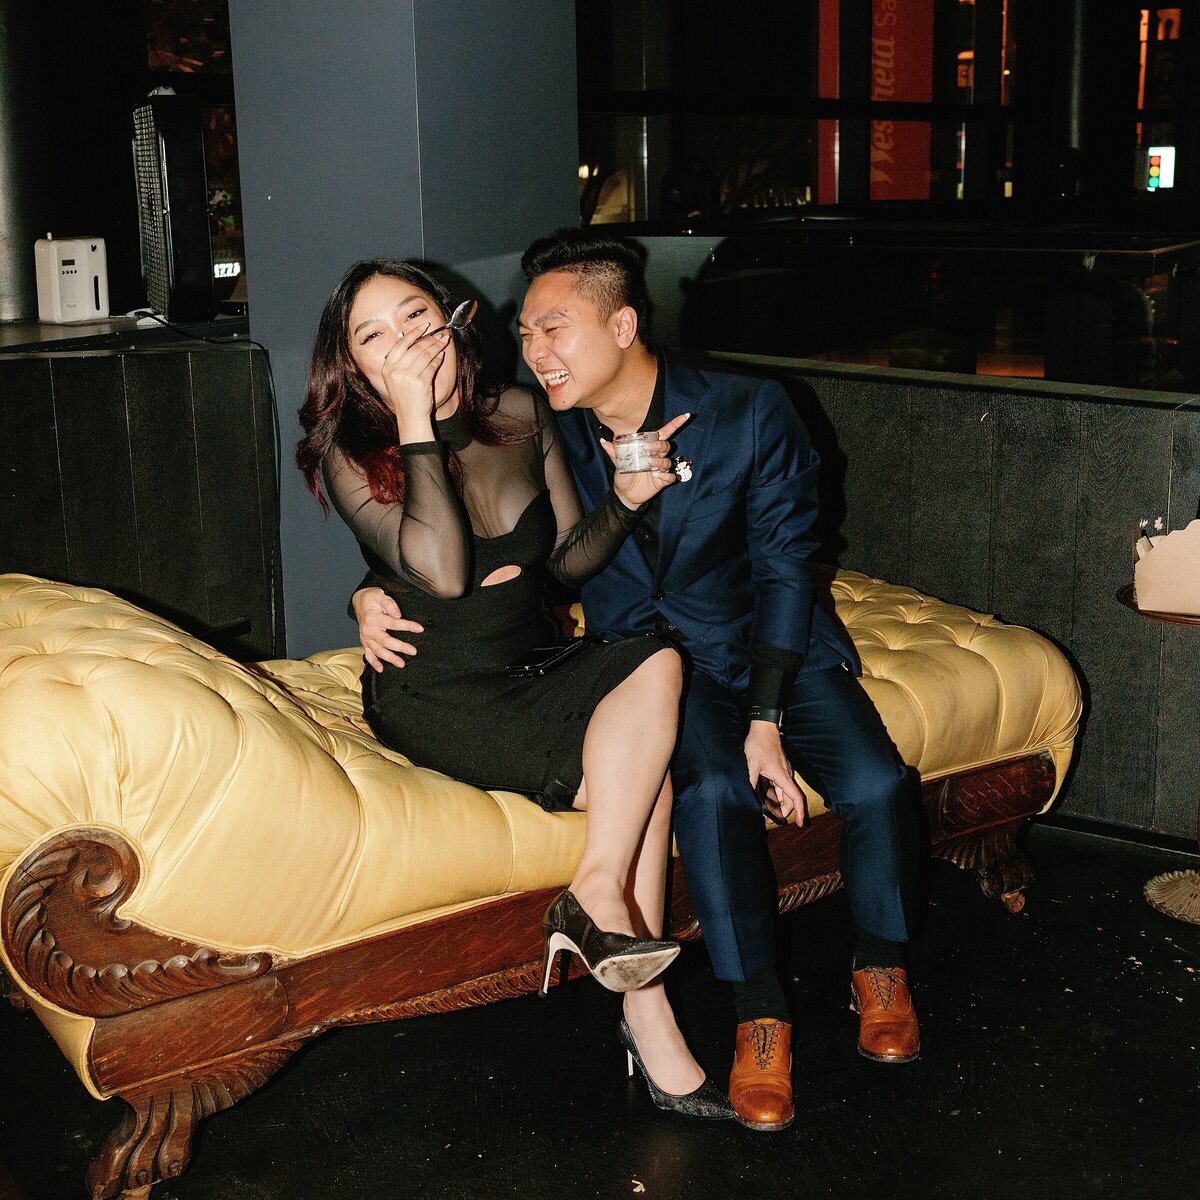 Chic couple laughs hard while cozied up on a chaise lounge